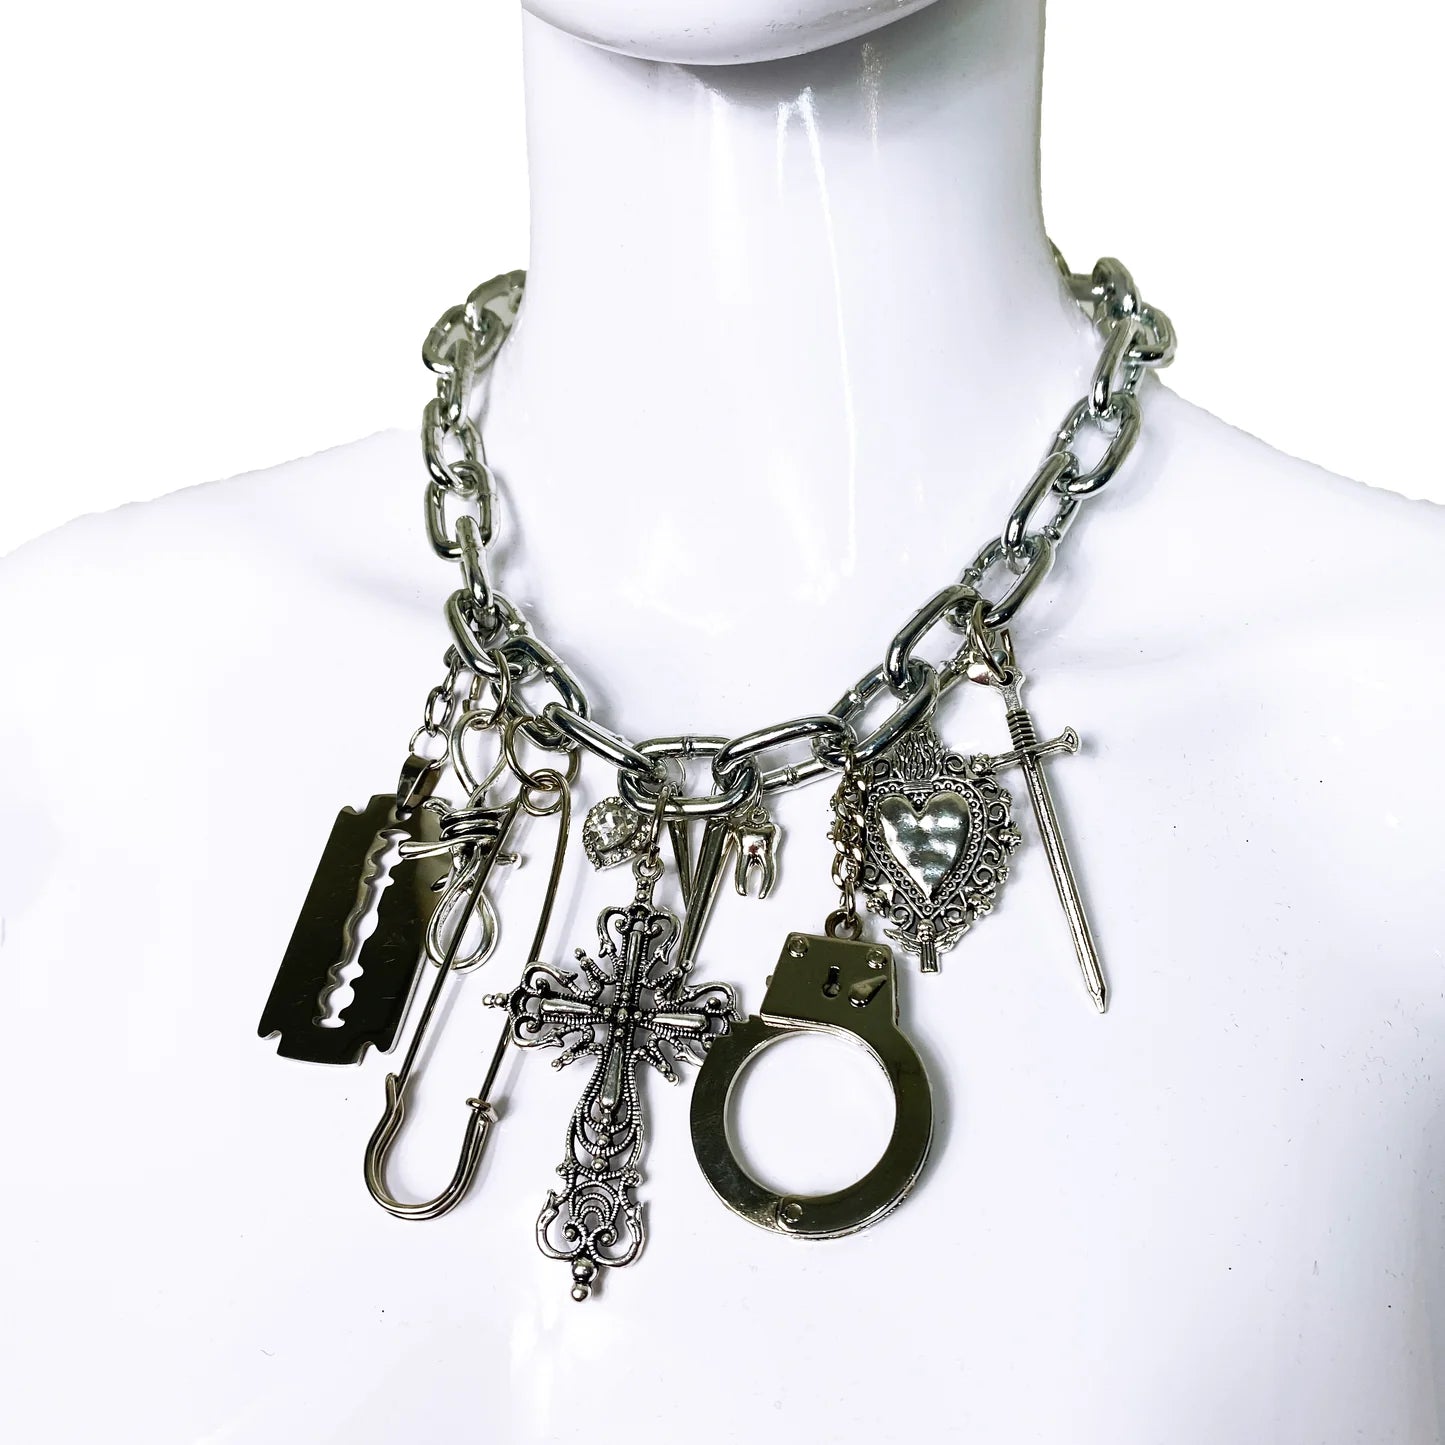 Charms necklace by King of Hearts